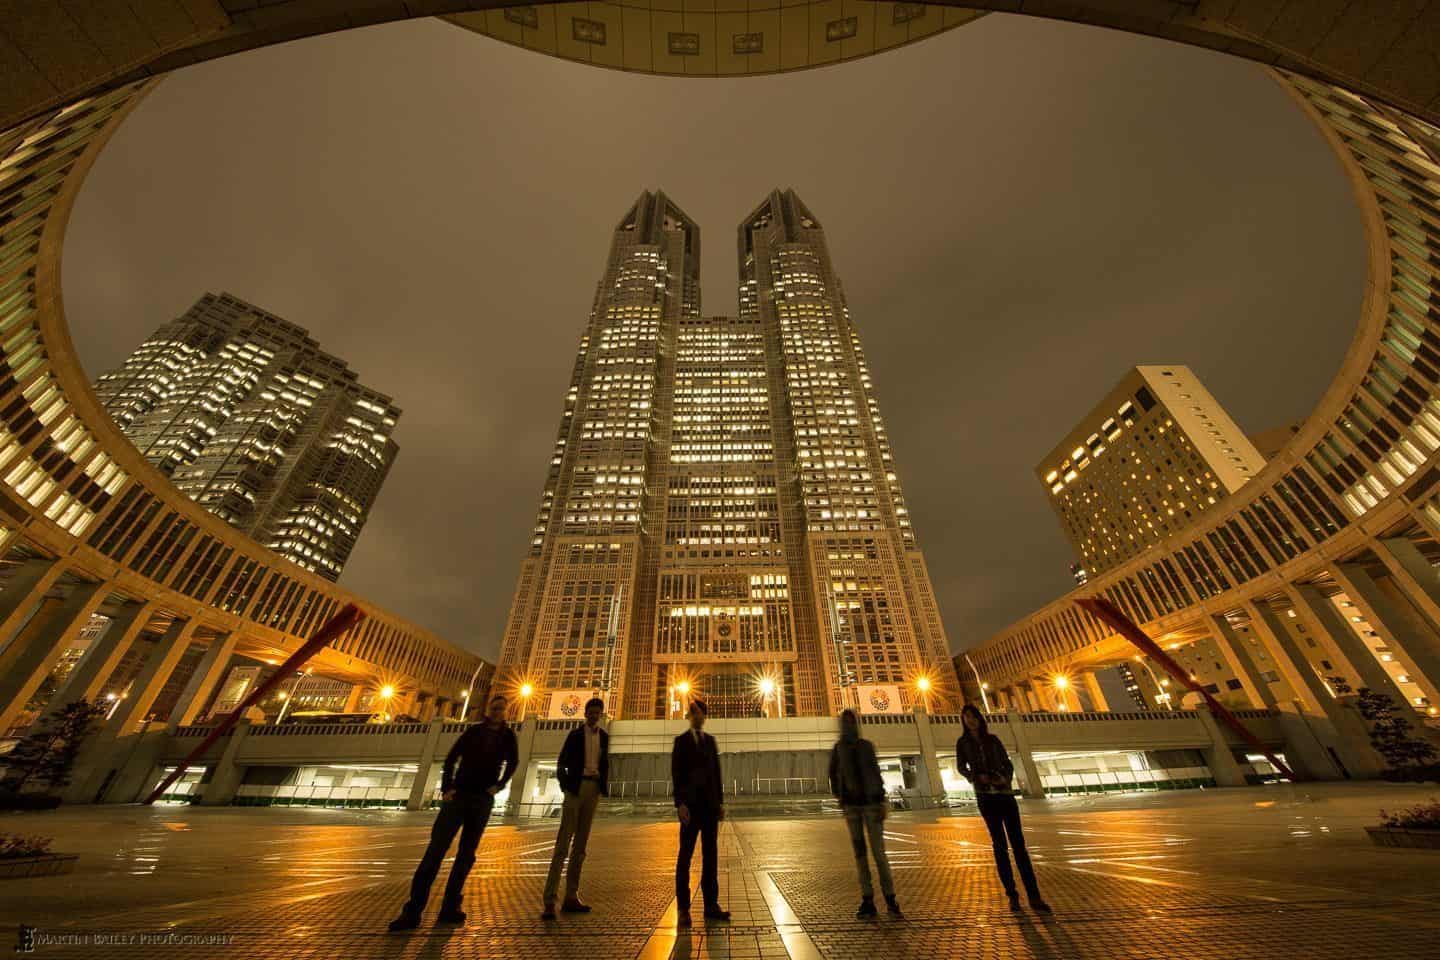 With Friend's at Tokyo Metropolitan Government Building